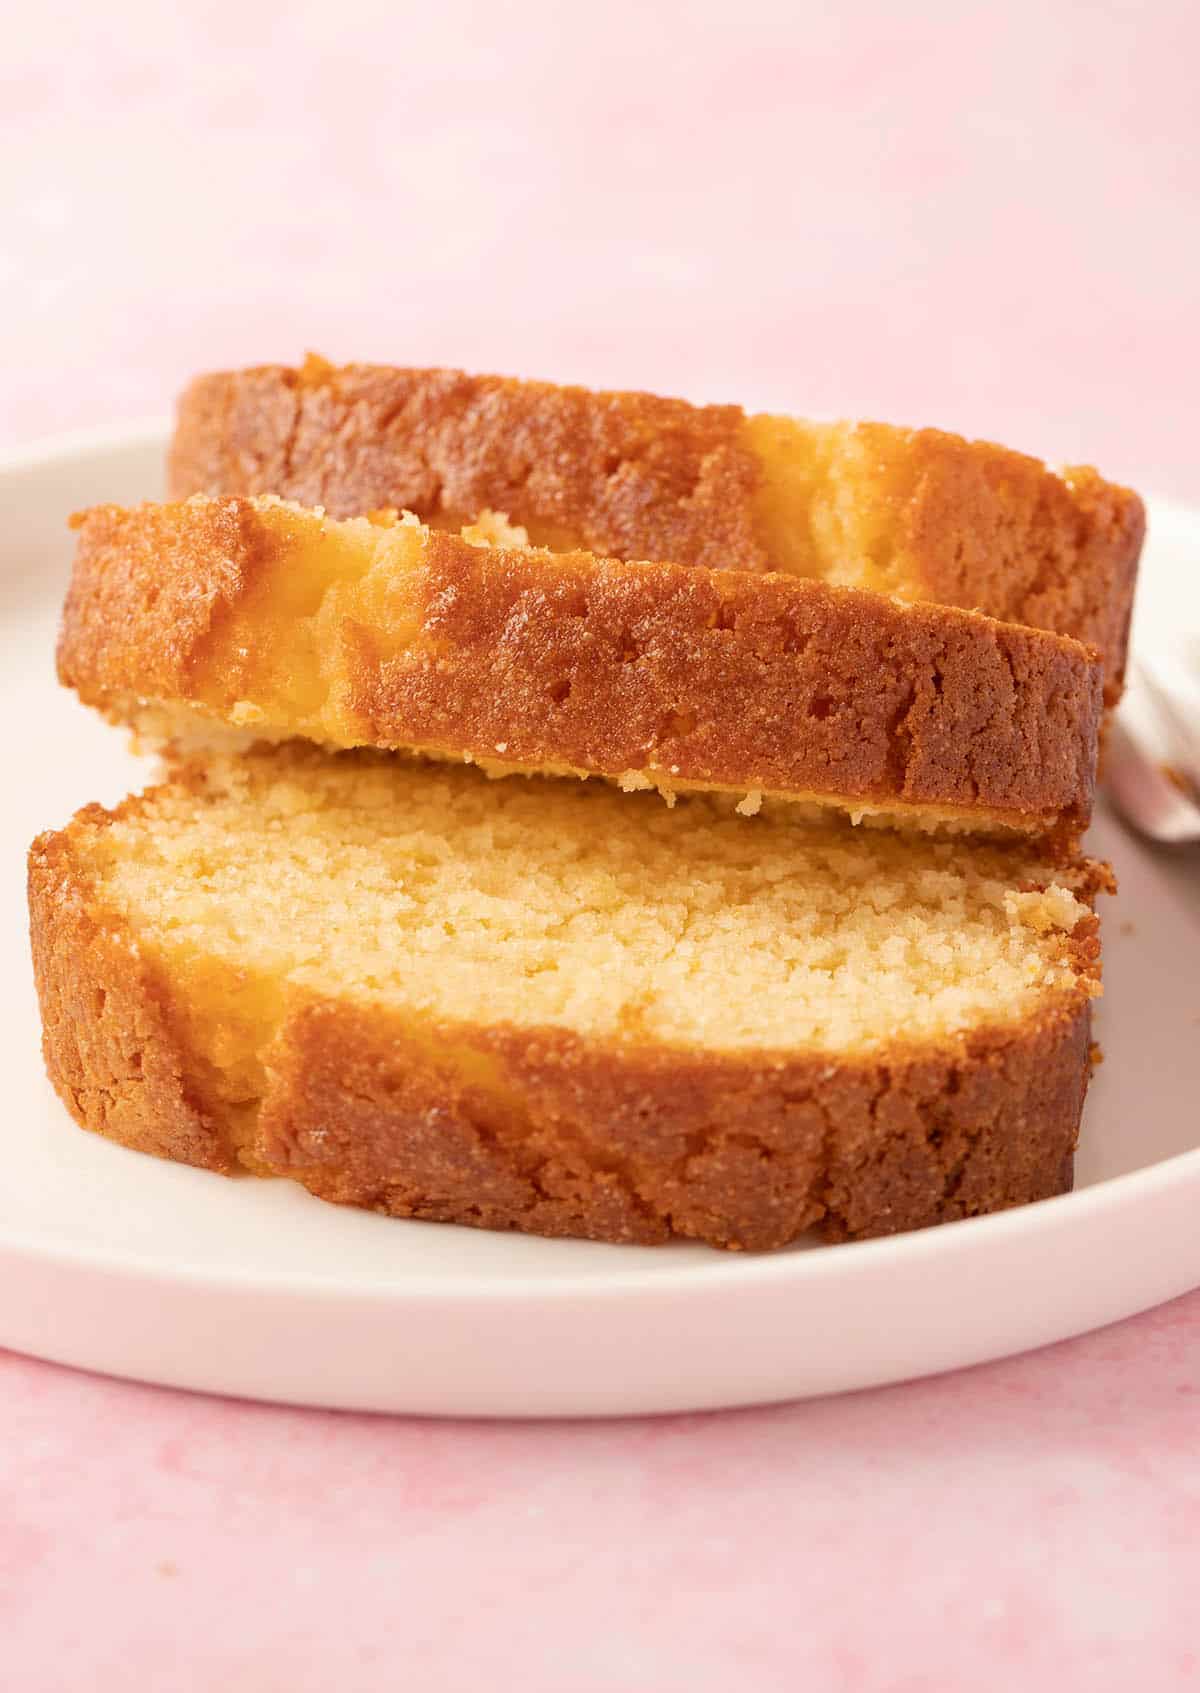 Slices of a homemade Lemon Syrup Cake sitting on a white plate.